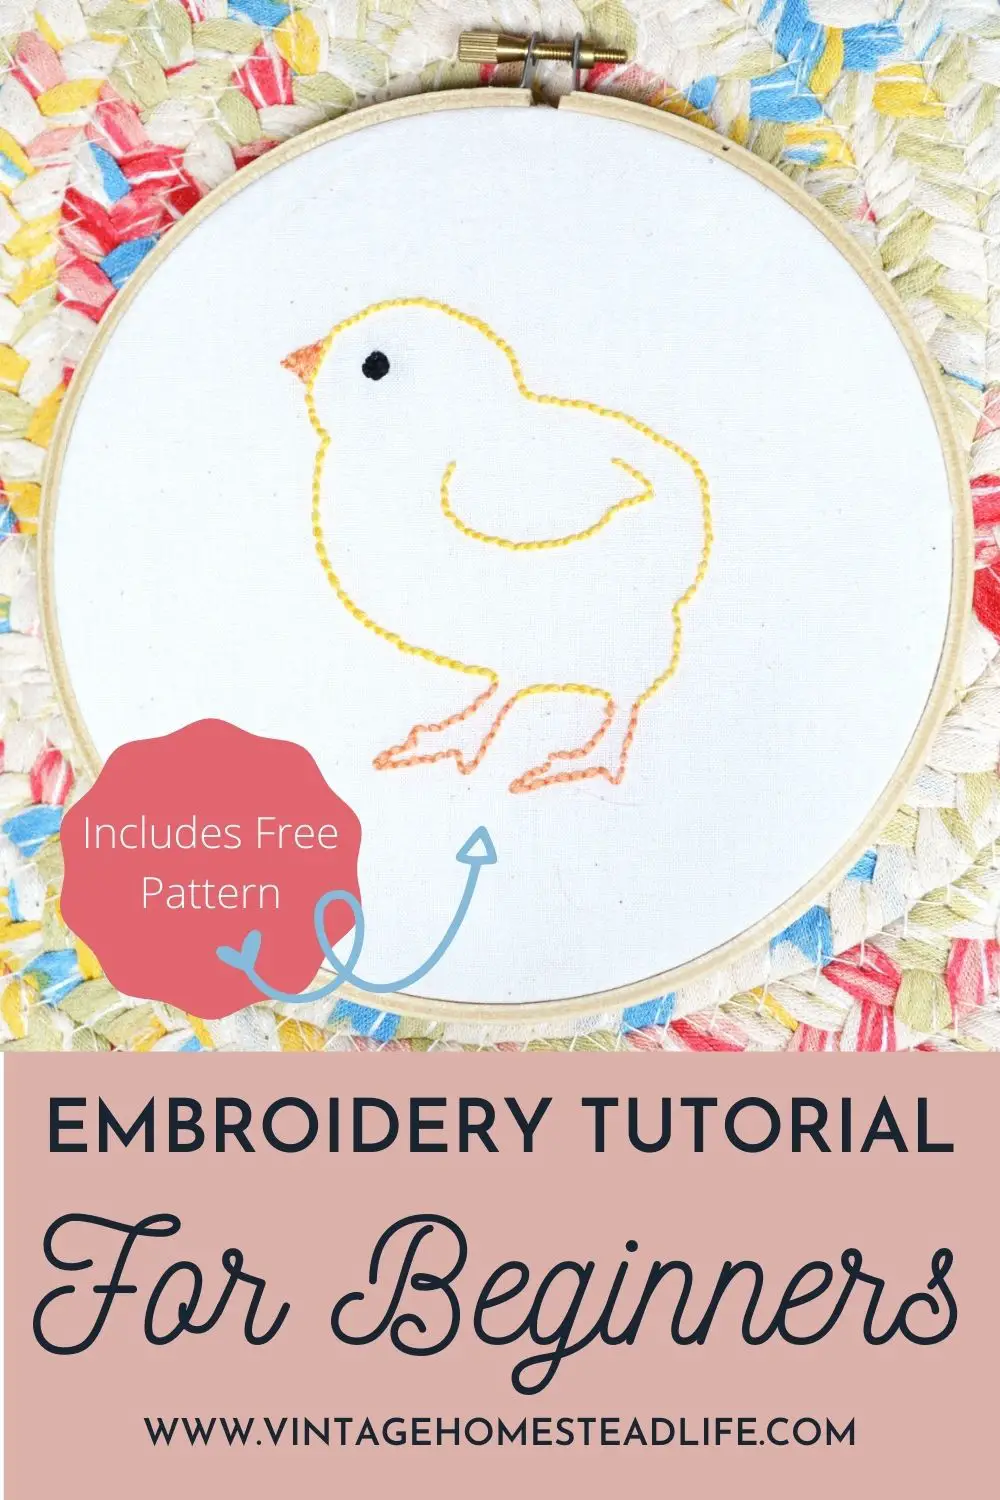 Embroidery is a beginner friendly craft to learn. This tutorial includes a free pattern of this adorable little chick!